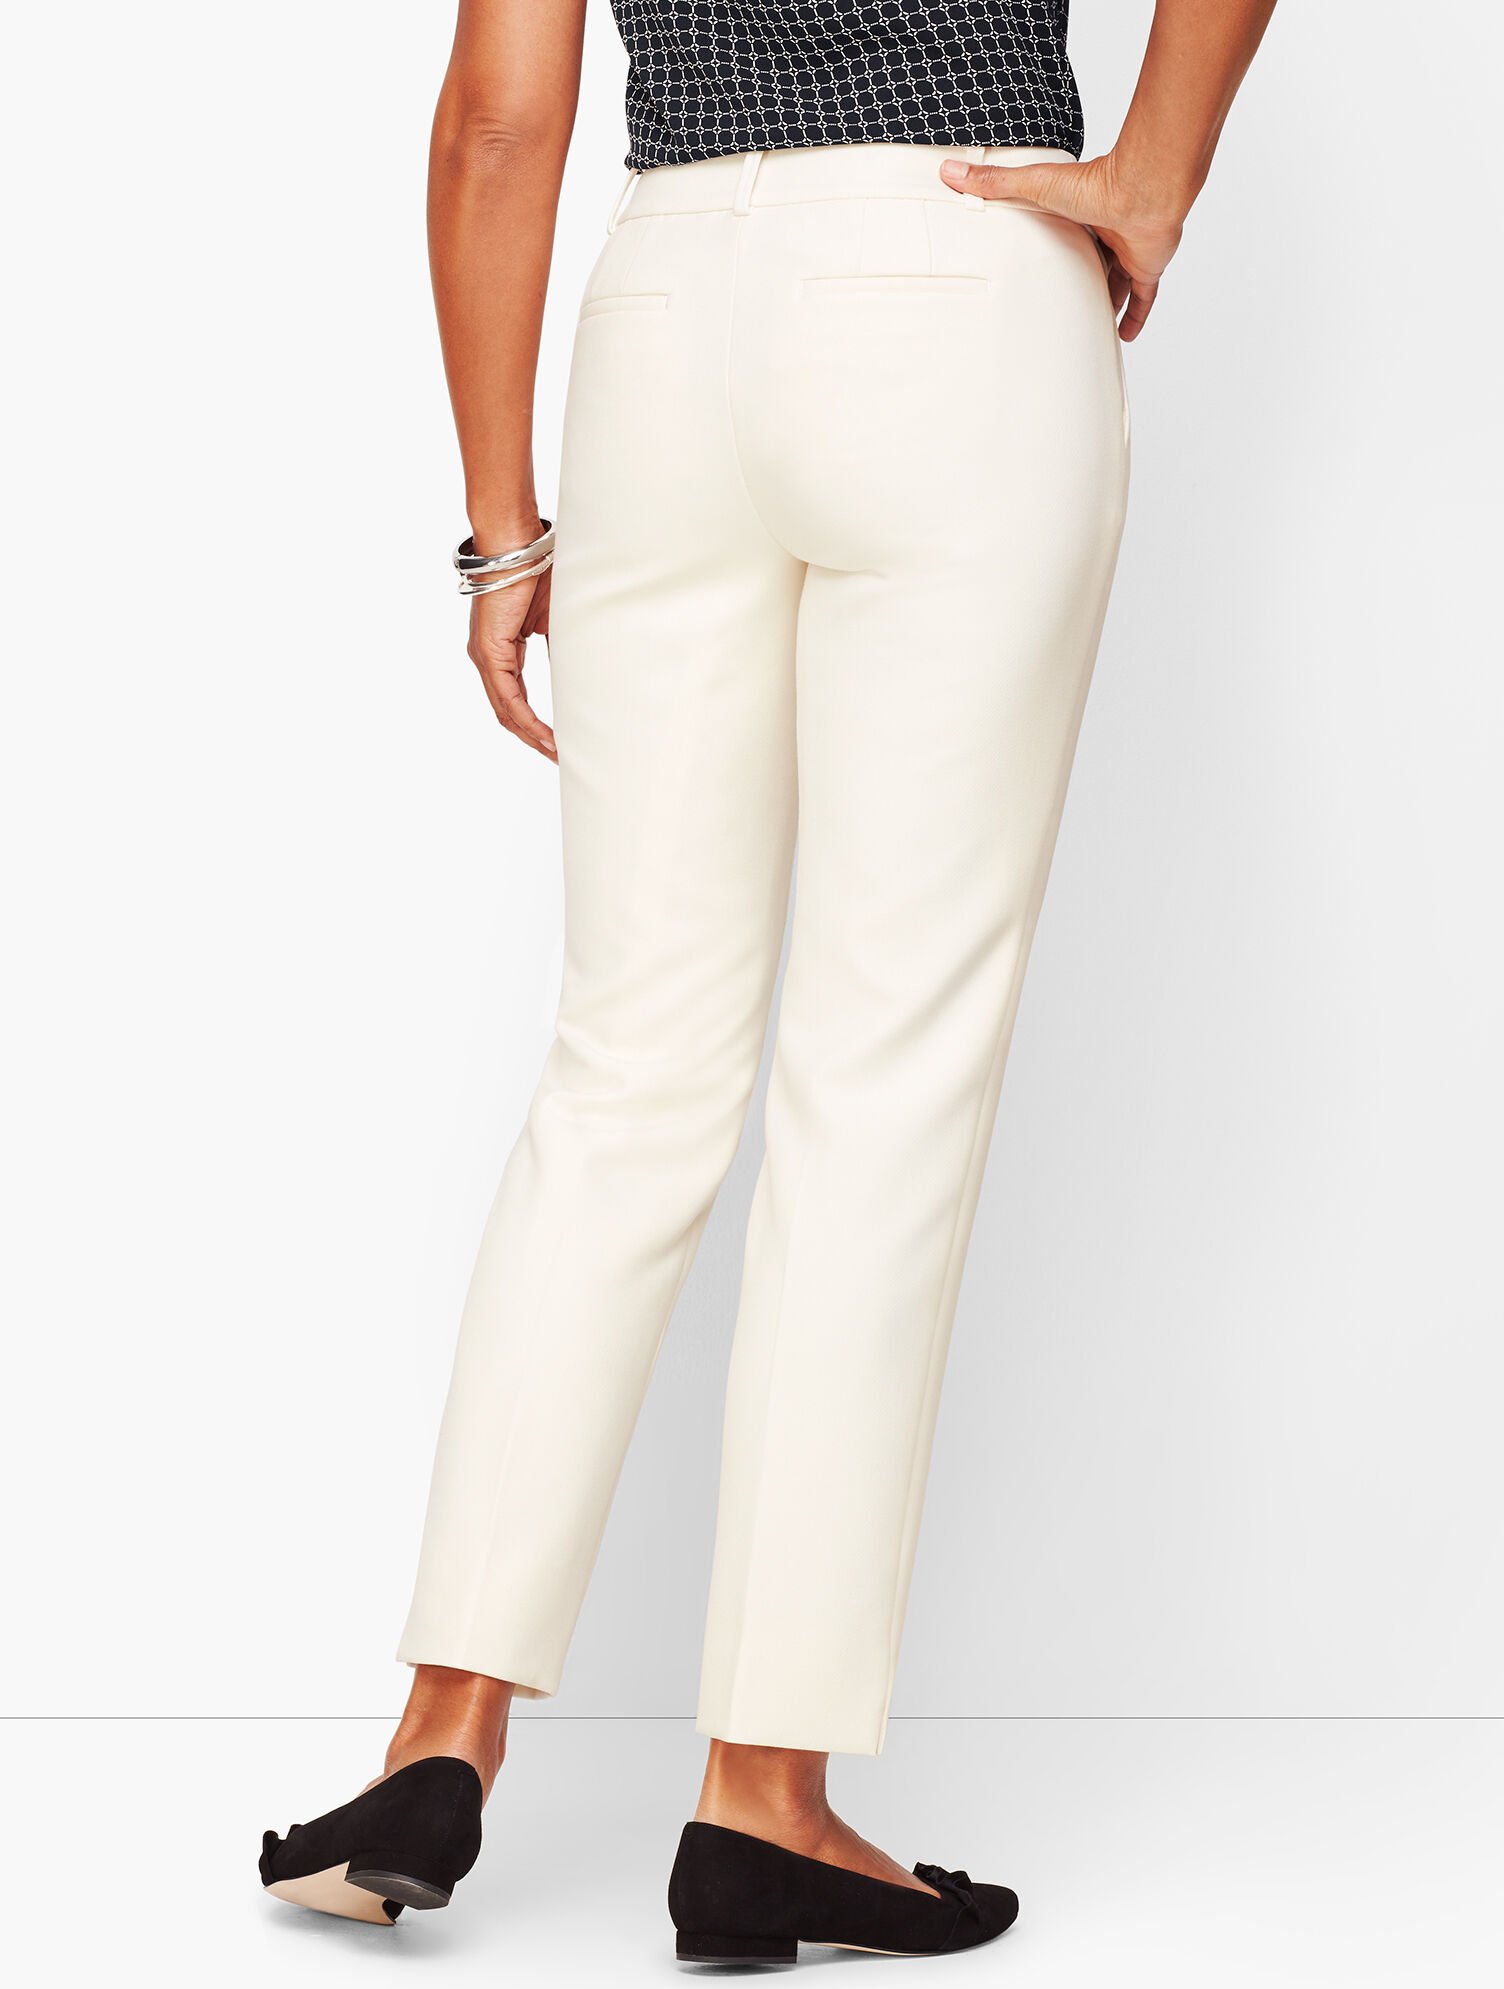 Talbots Hampshire Ankle Pants - Curvy Fit - Lined Ivory